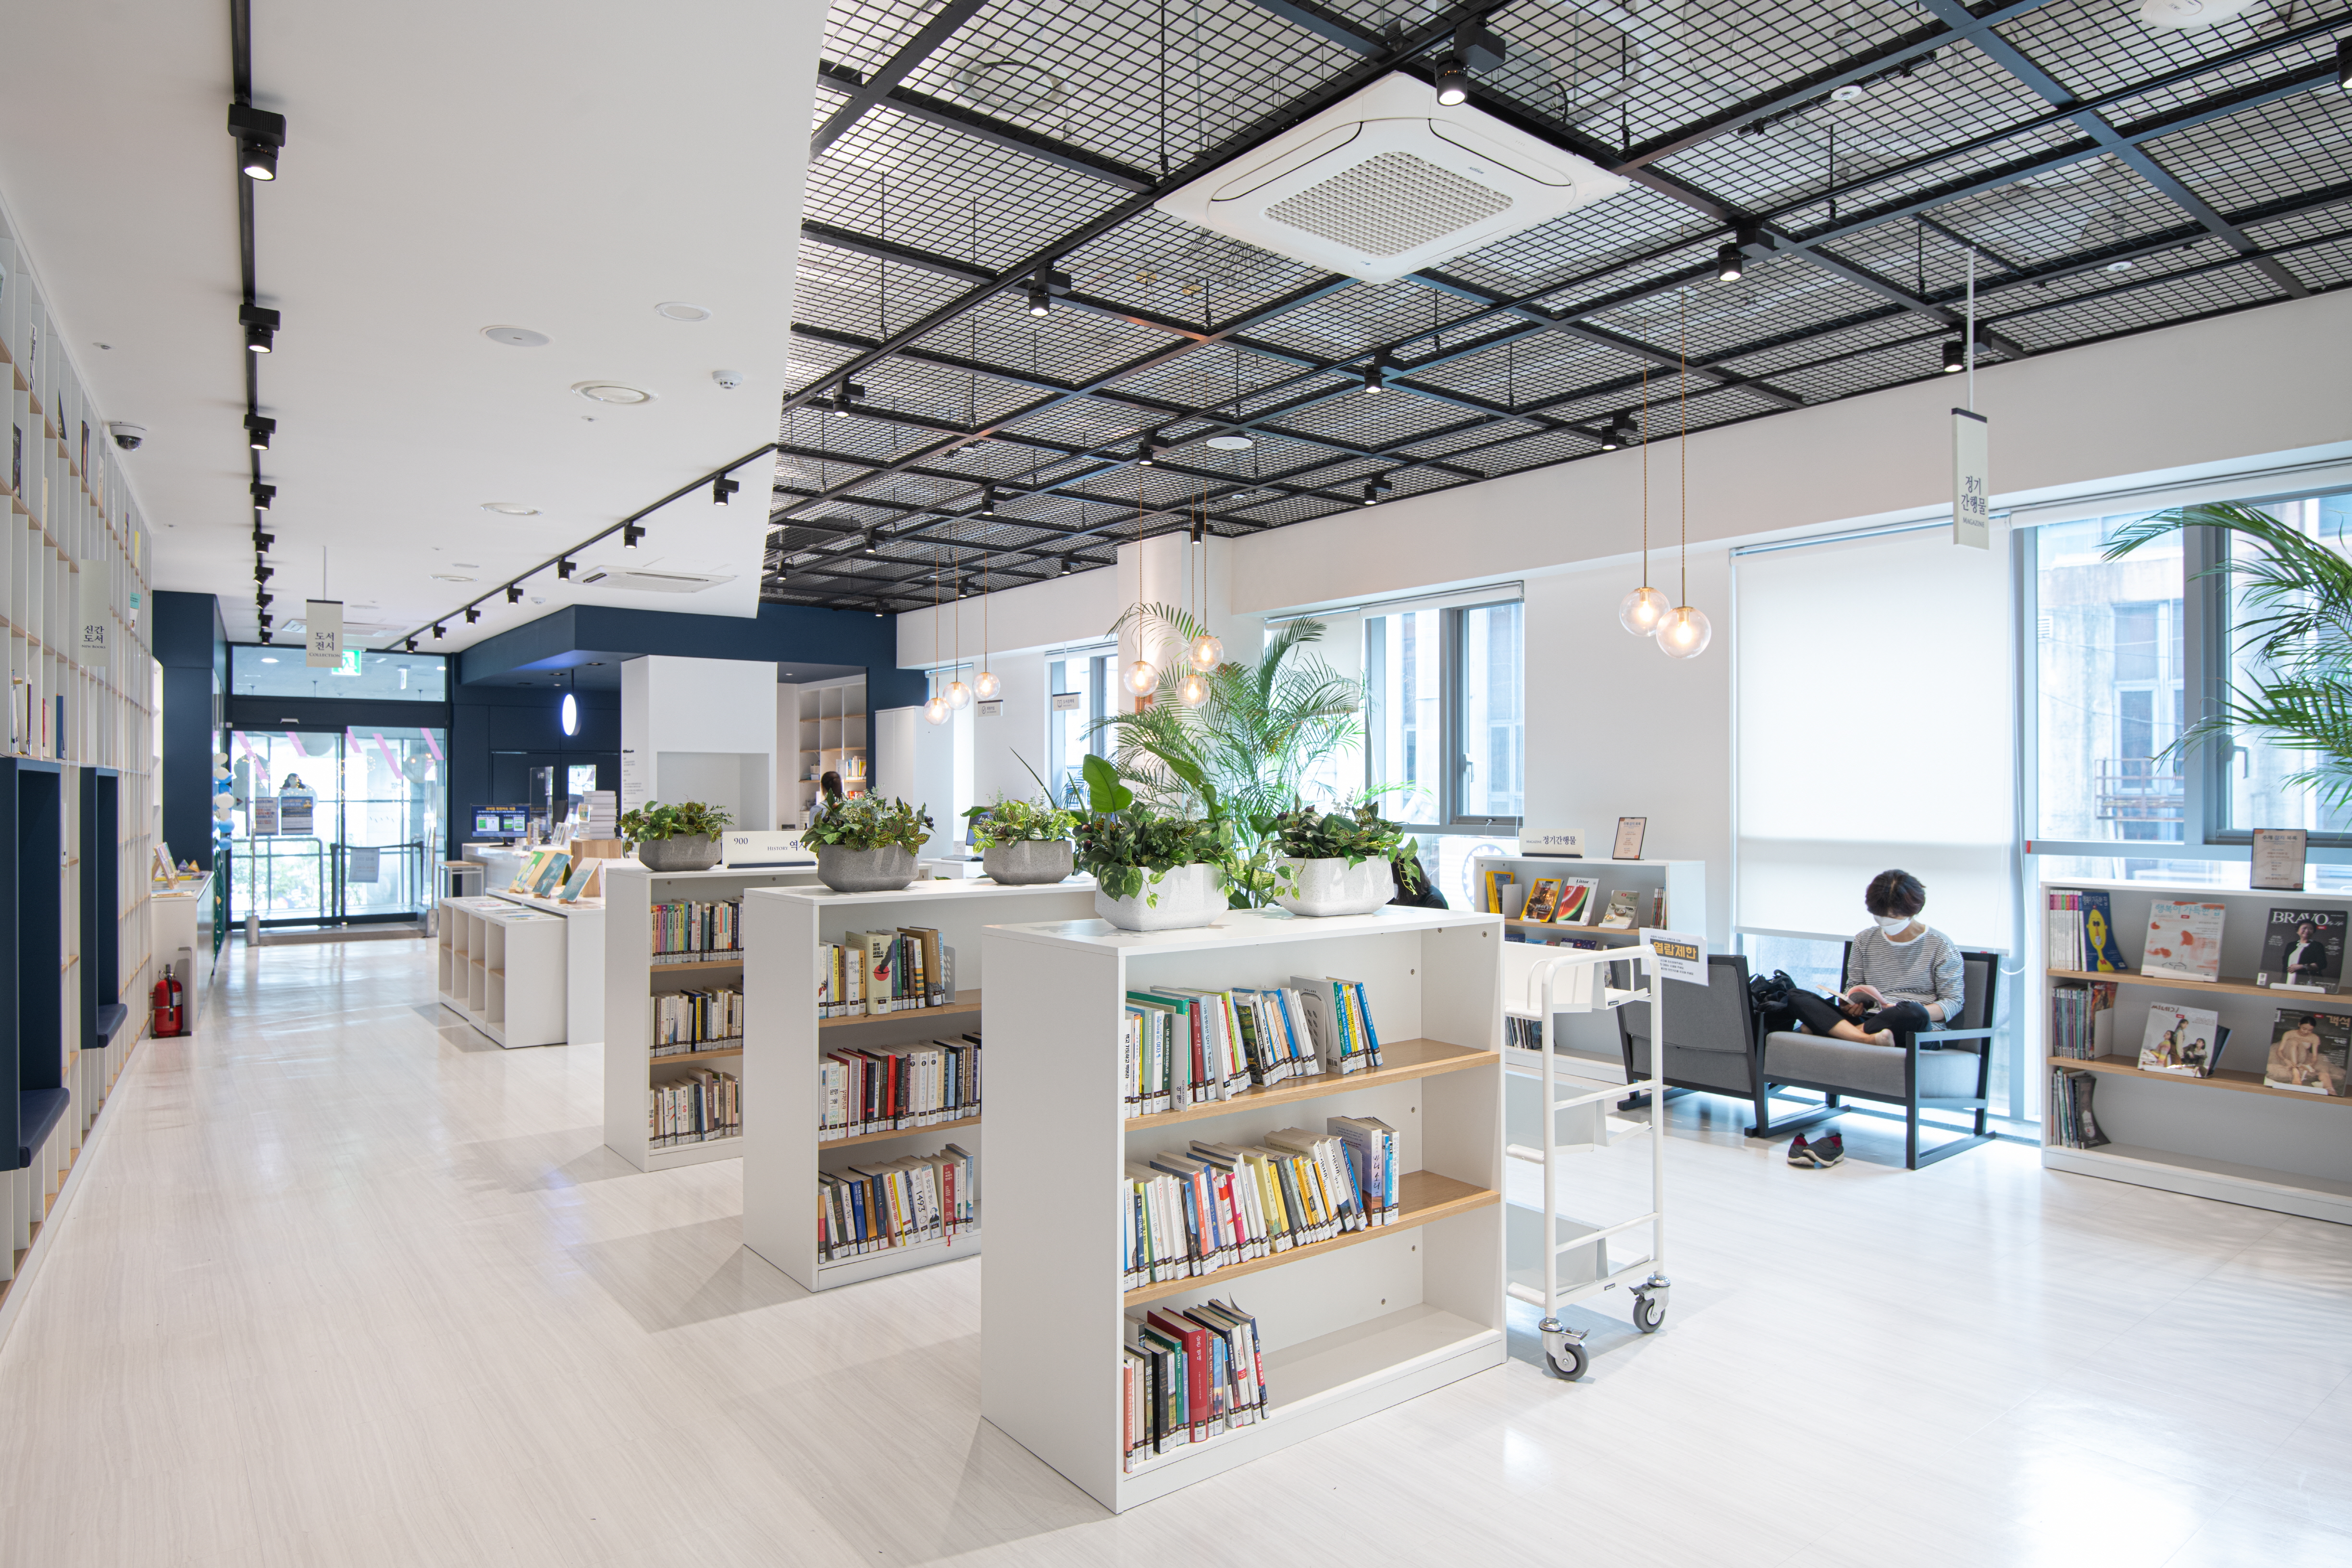 Seoul Seongbuk Media Culture Maru2 : The inside with a large number of books and a space to relax 1
